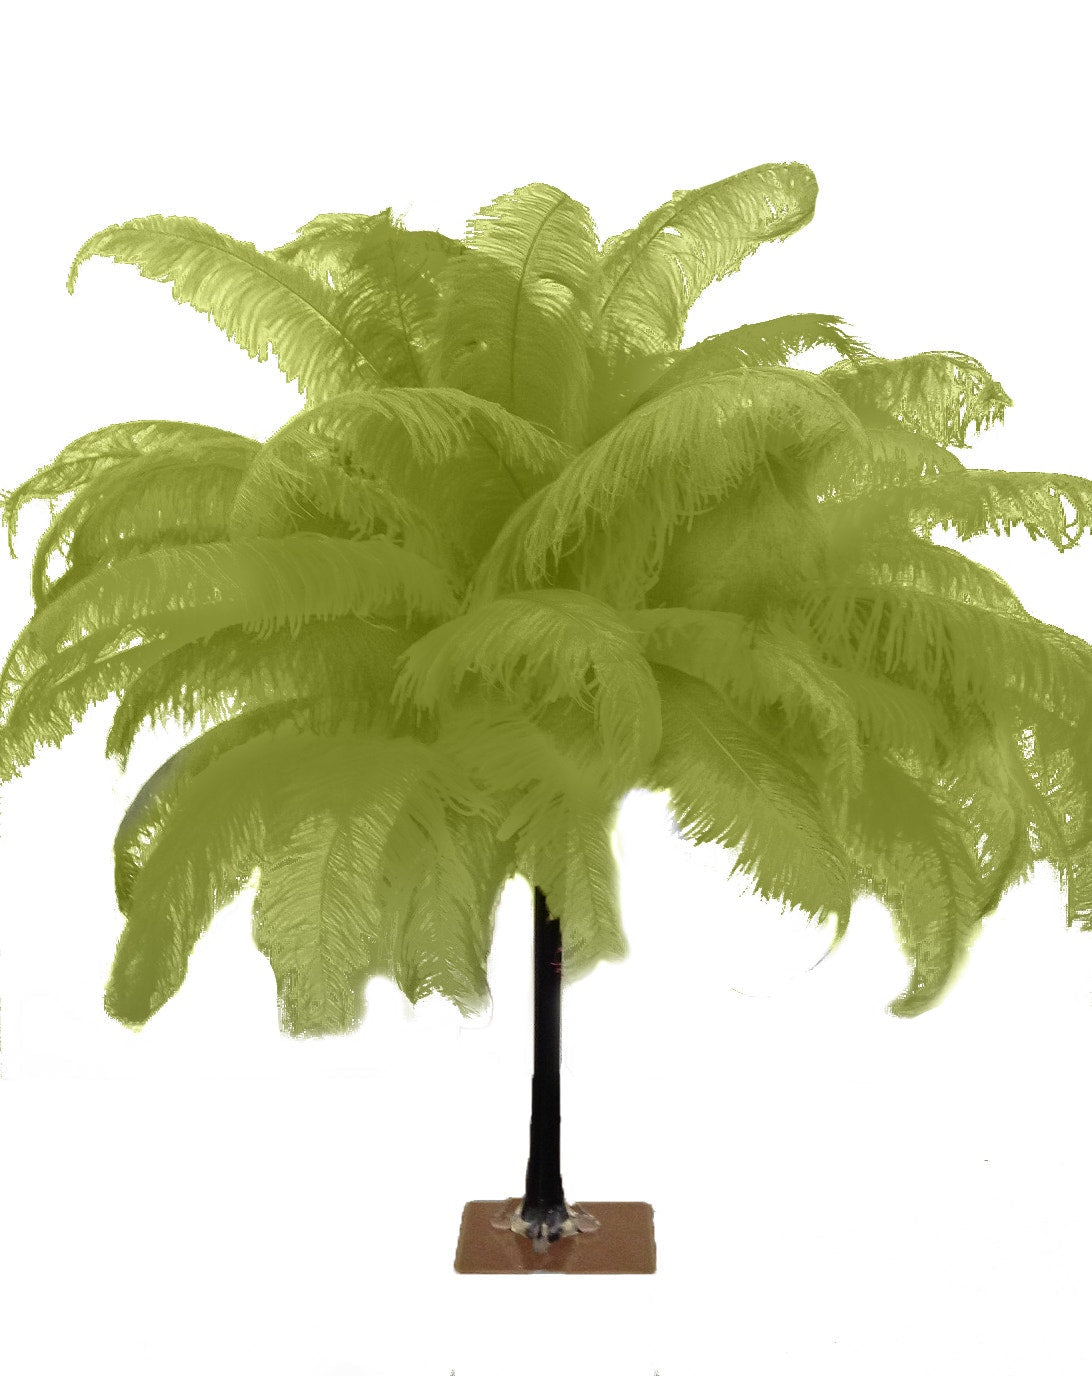 Large Ostrich Feathers - 18-24" Spads - Basil